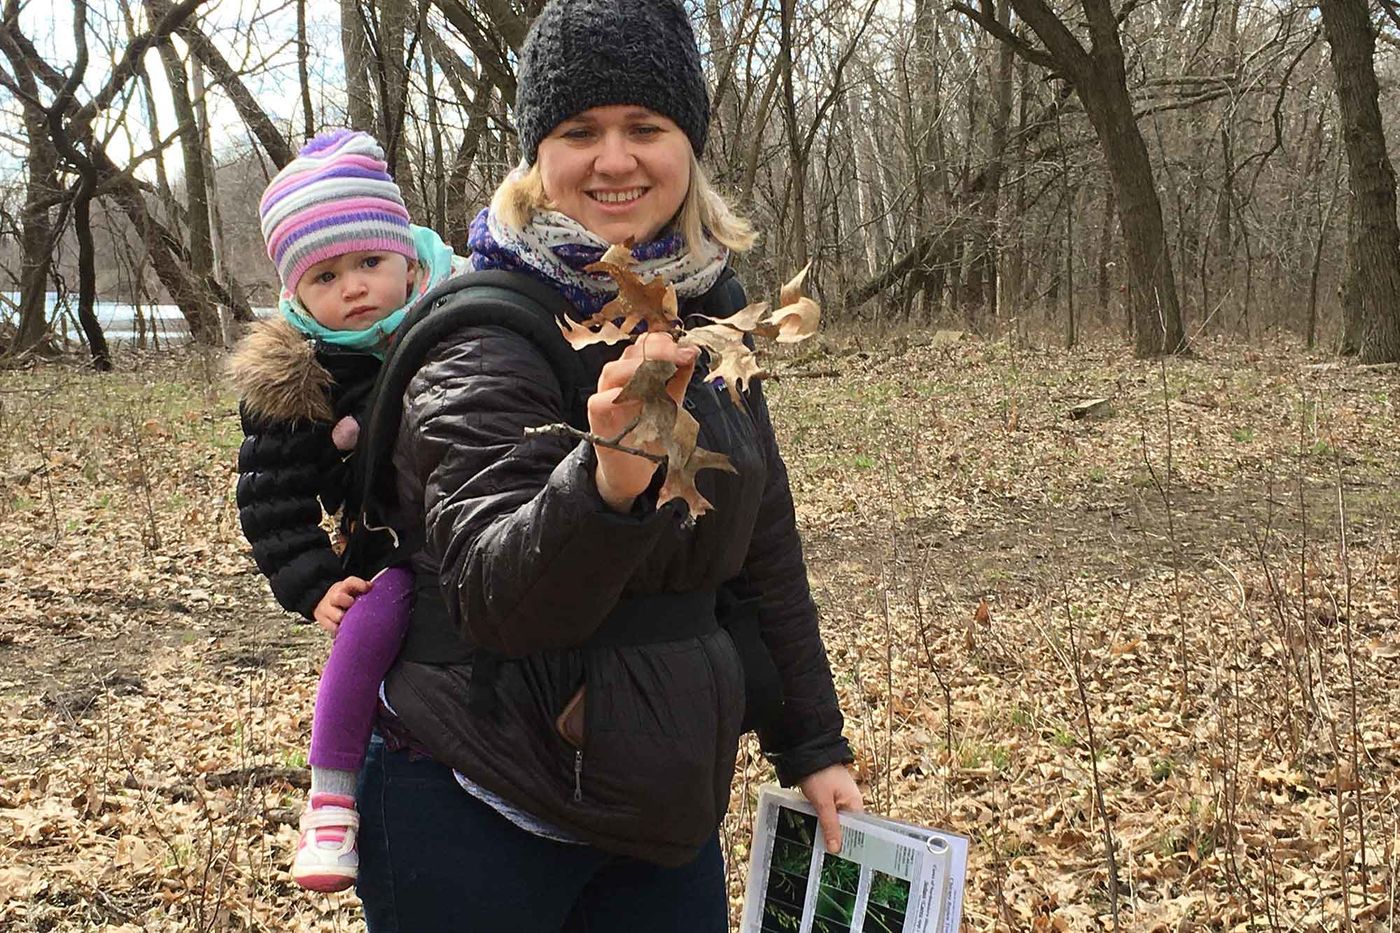 A mother and her young child explore the woods with a Field Museum field guide. The child, attached to her mother's back, looks on as her mother holds a bundle of dried leaves. 